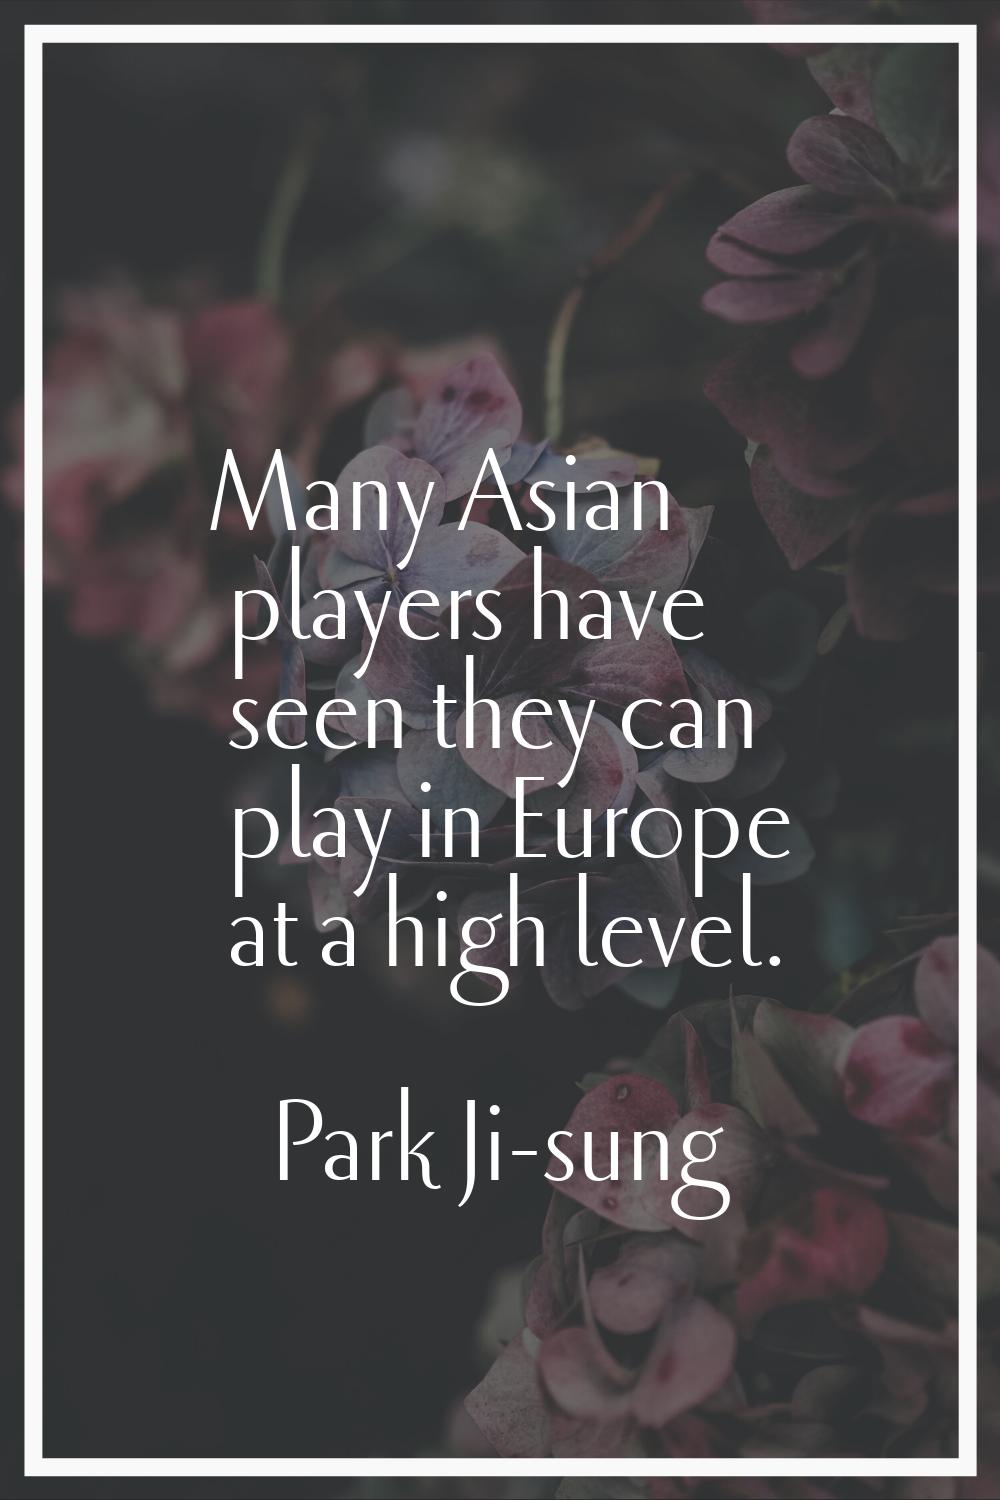 Many Asian players have seen they can play in Europe at a high level.